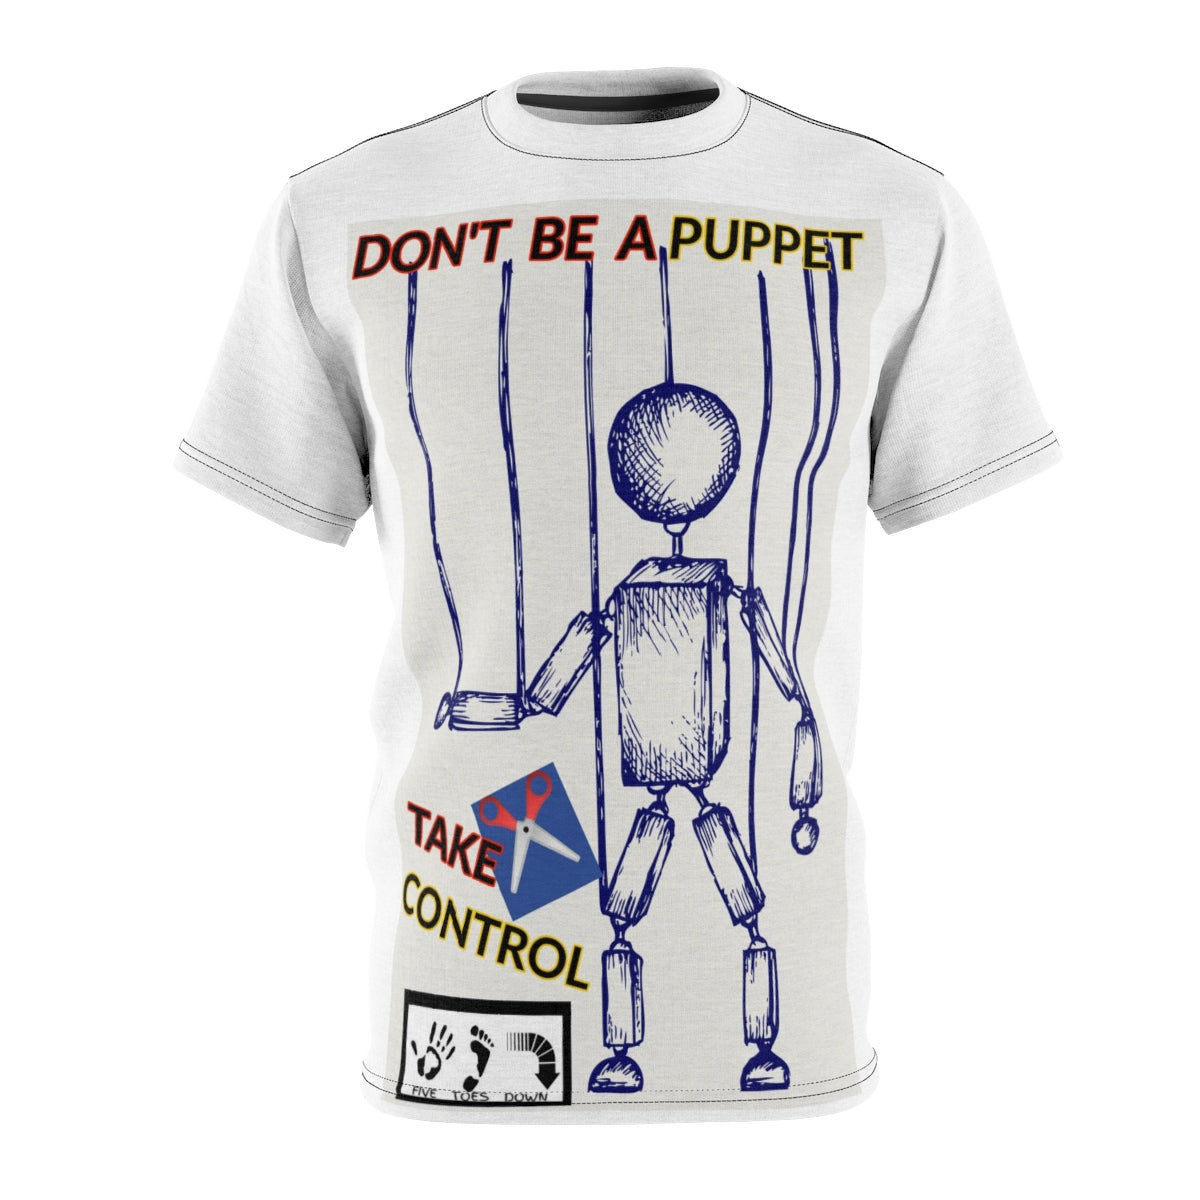 Five Toes Down Puppet Unisex Cut & Sew Tee